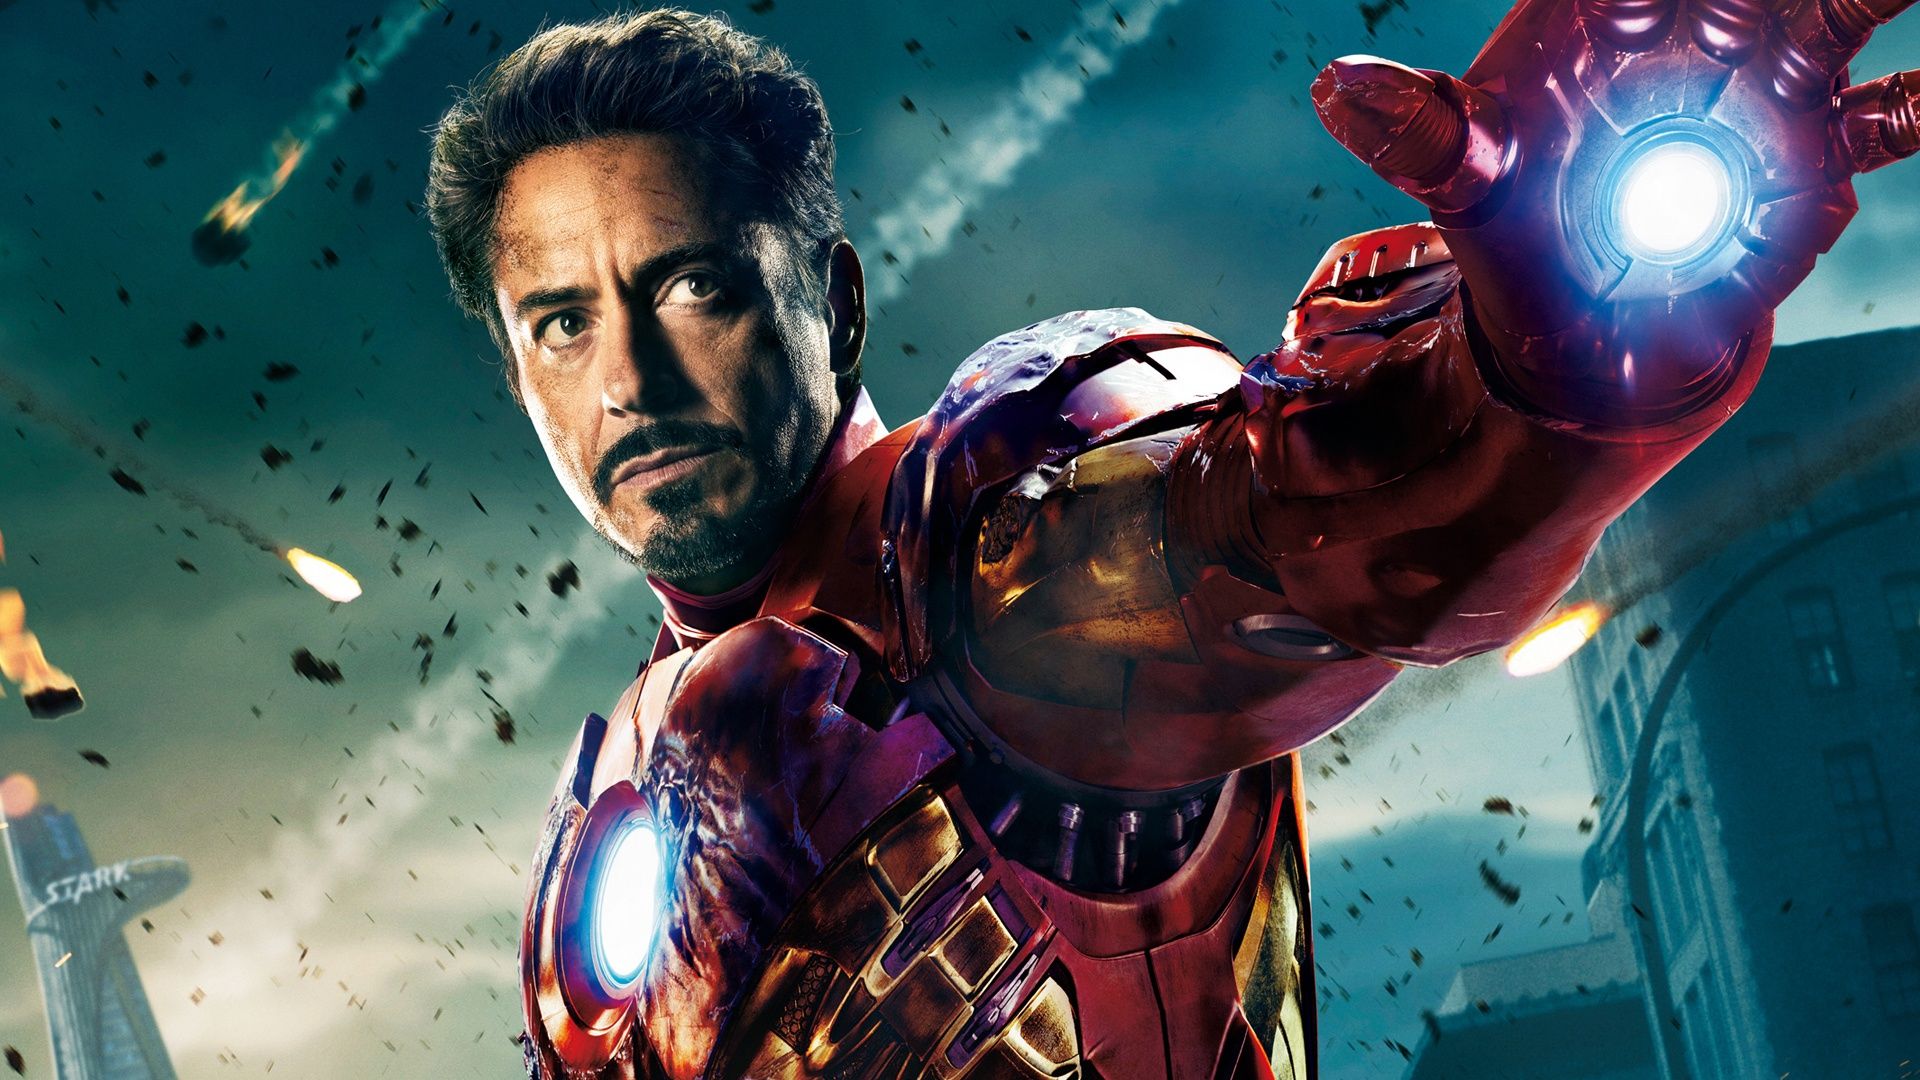 Iron Man in Avengers Movie Wallpapers HD Backgrounds